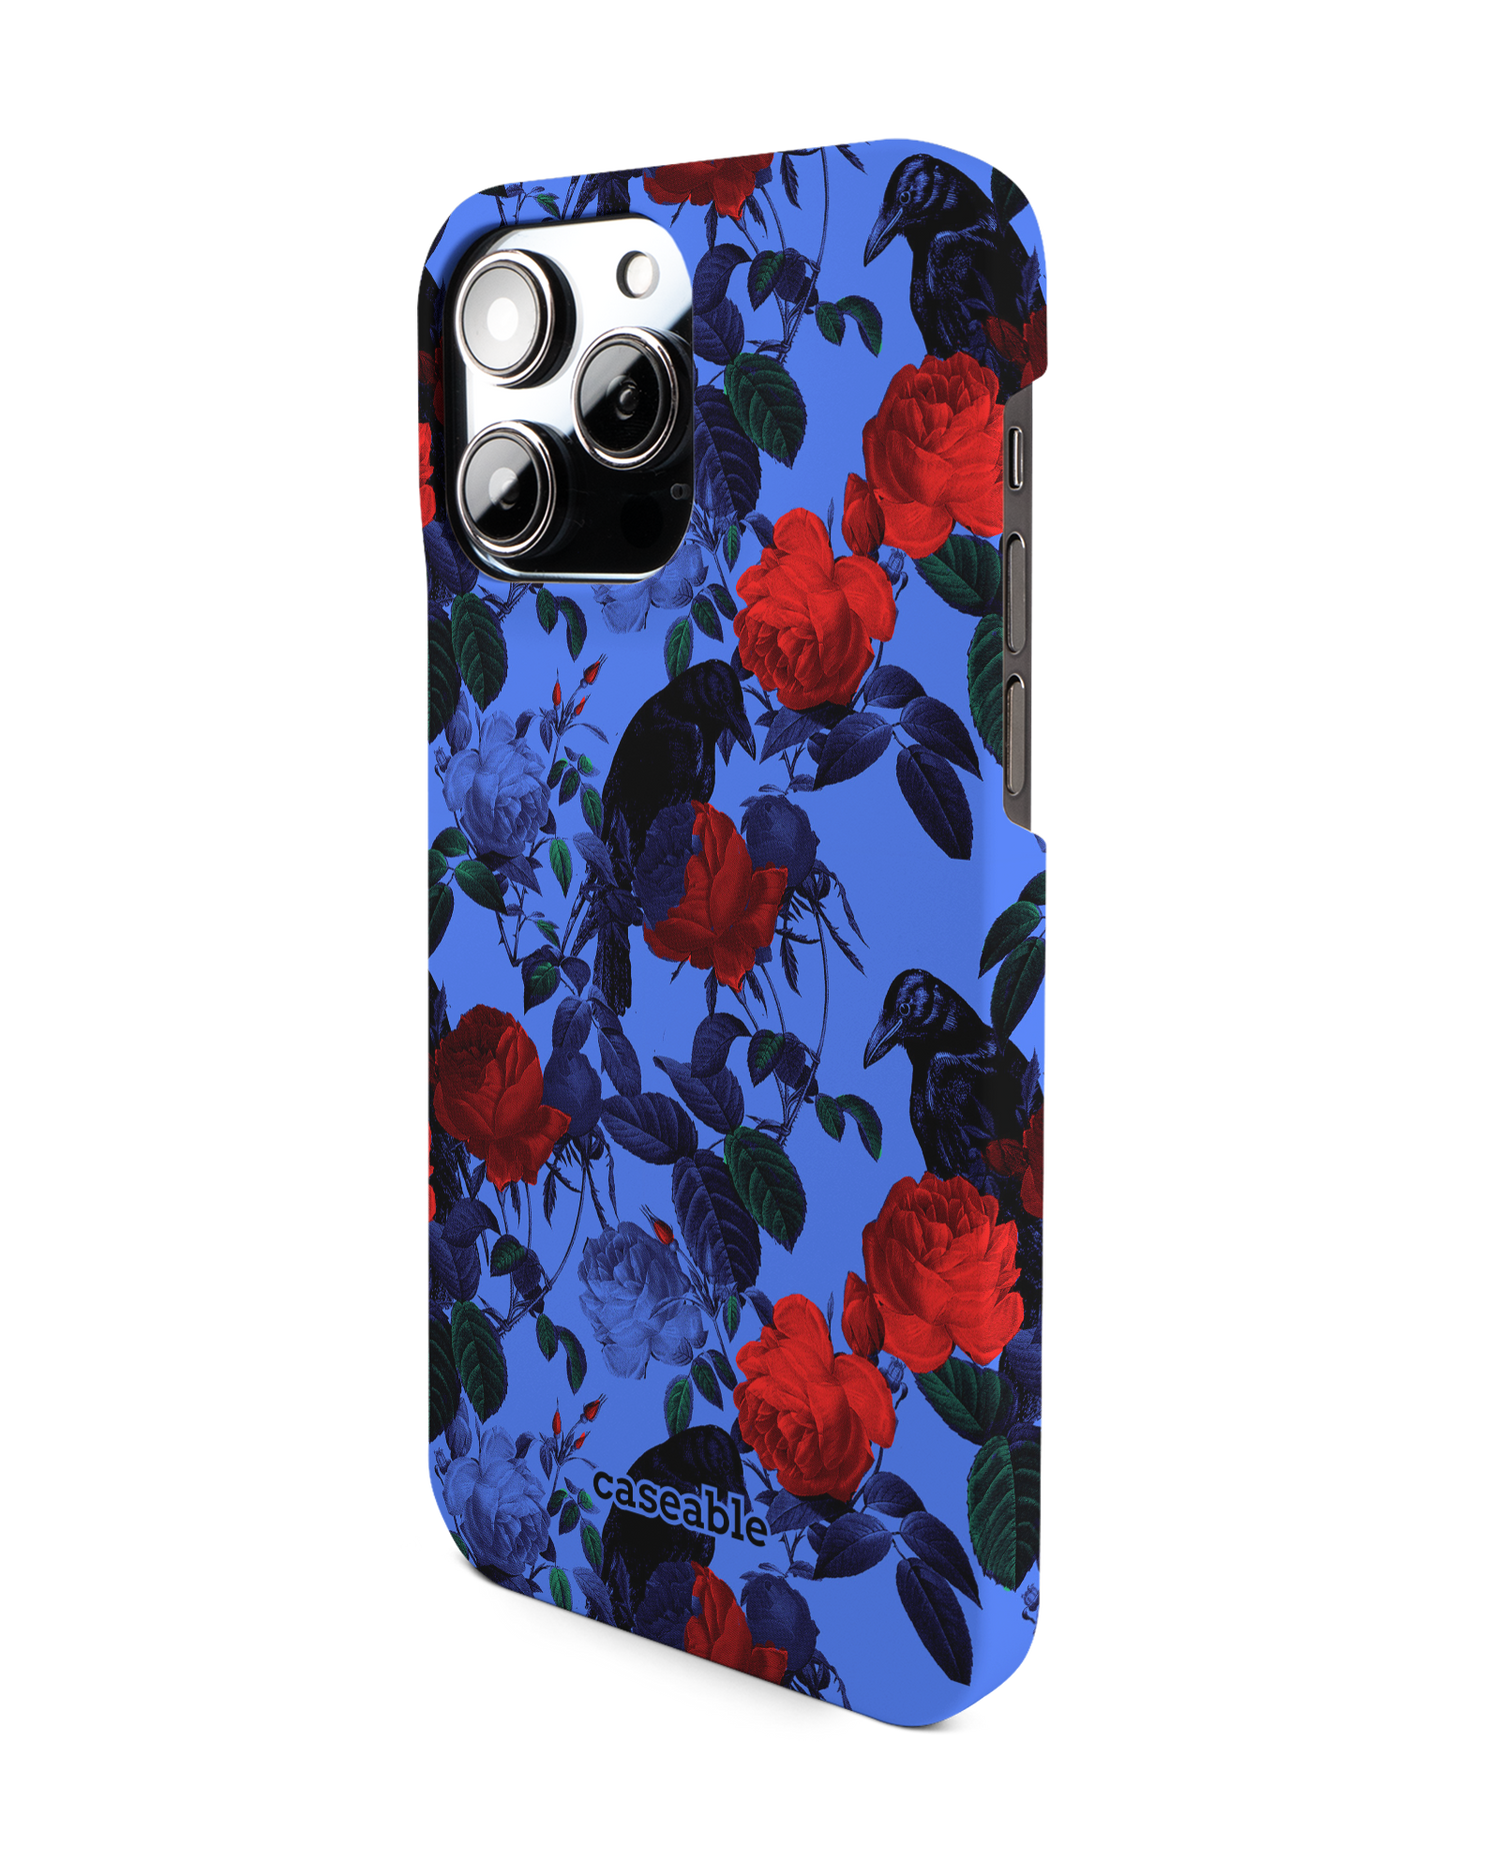 Roses And Ravens Hard Shell Phone Case for Apple iPhone 14 Pro Max: View from the right side